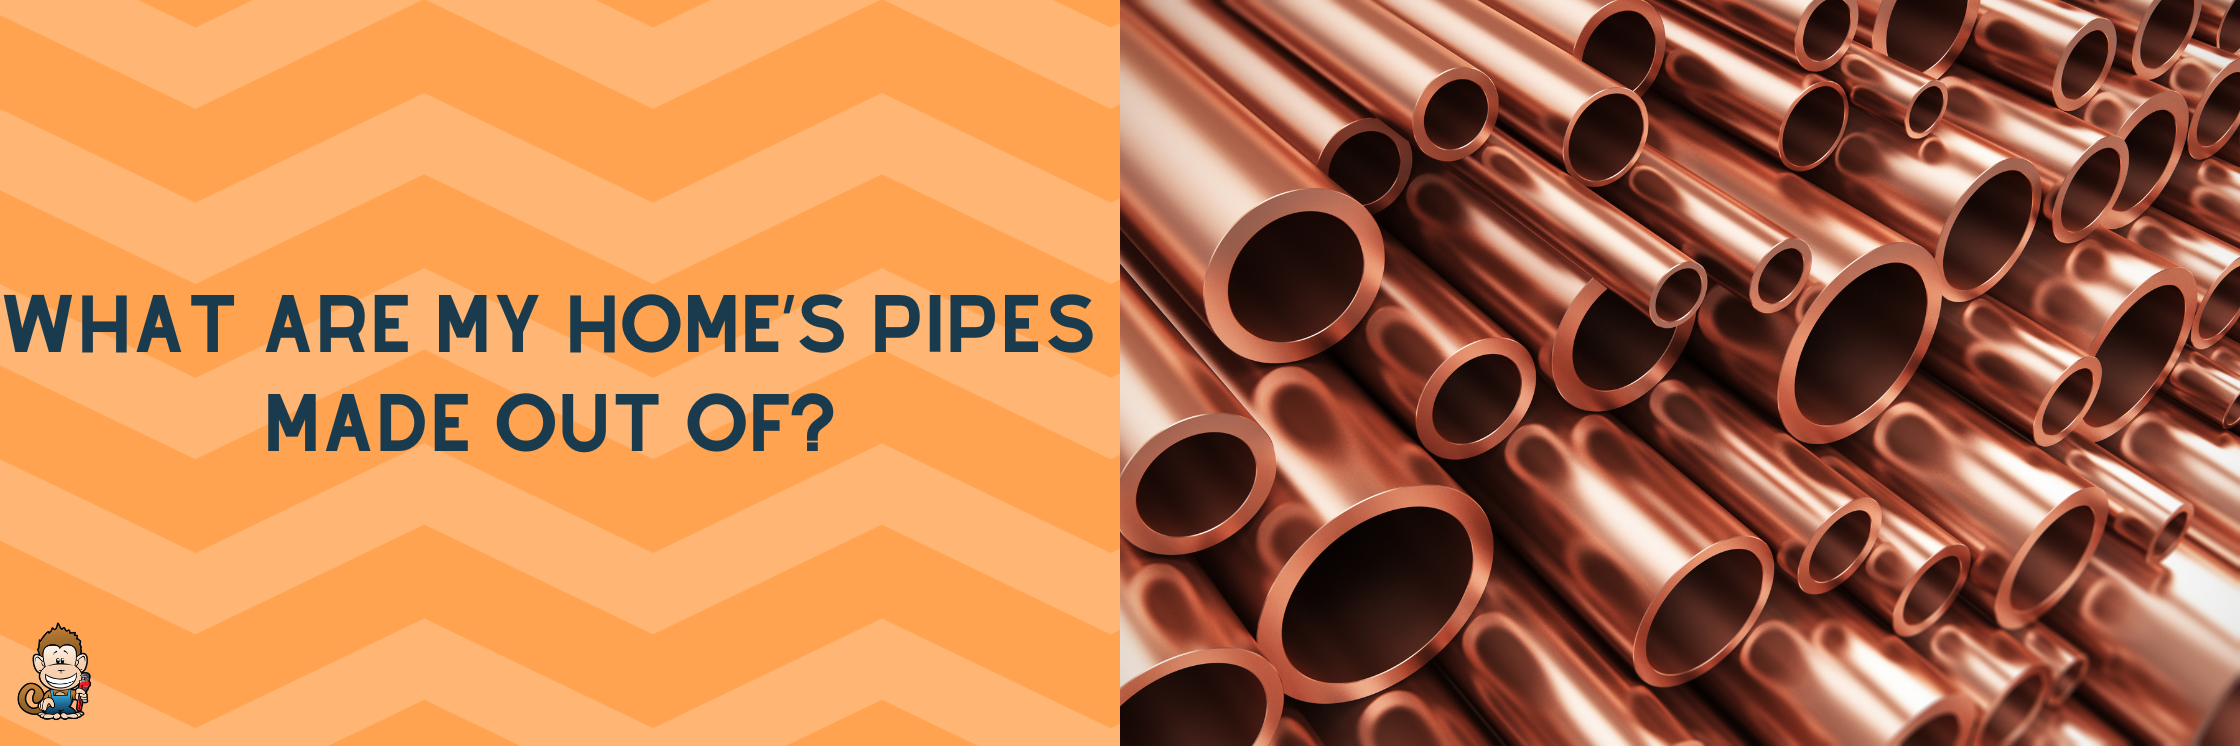 What are My Home’s Pipes Made Out Of?